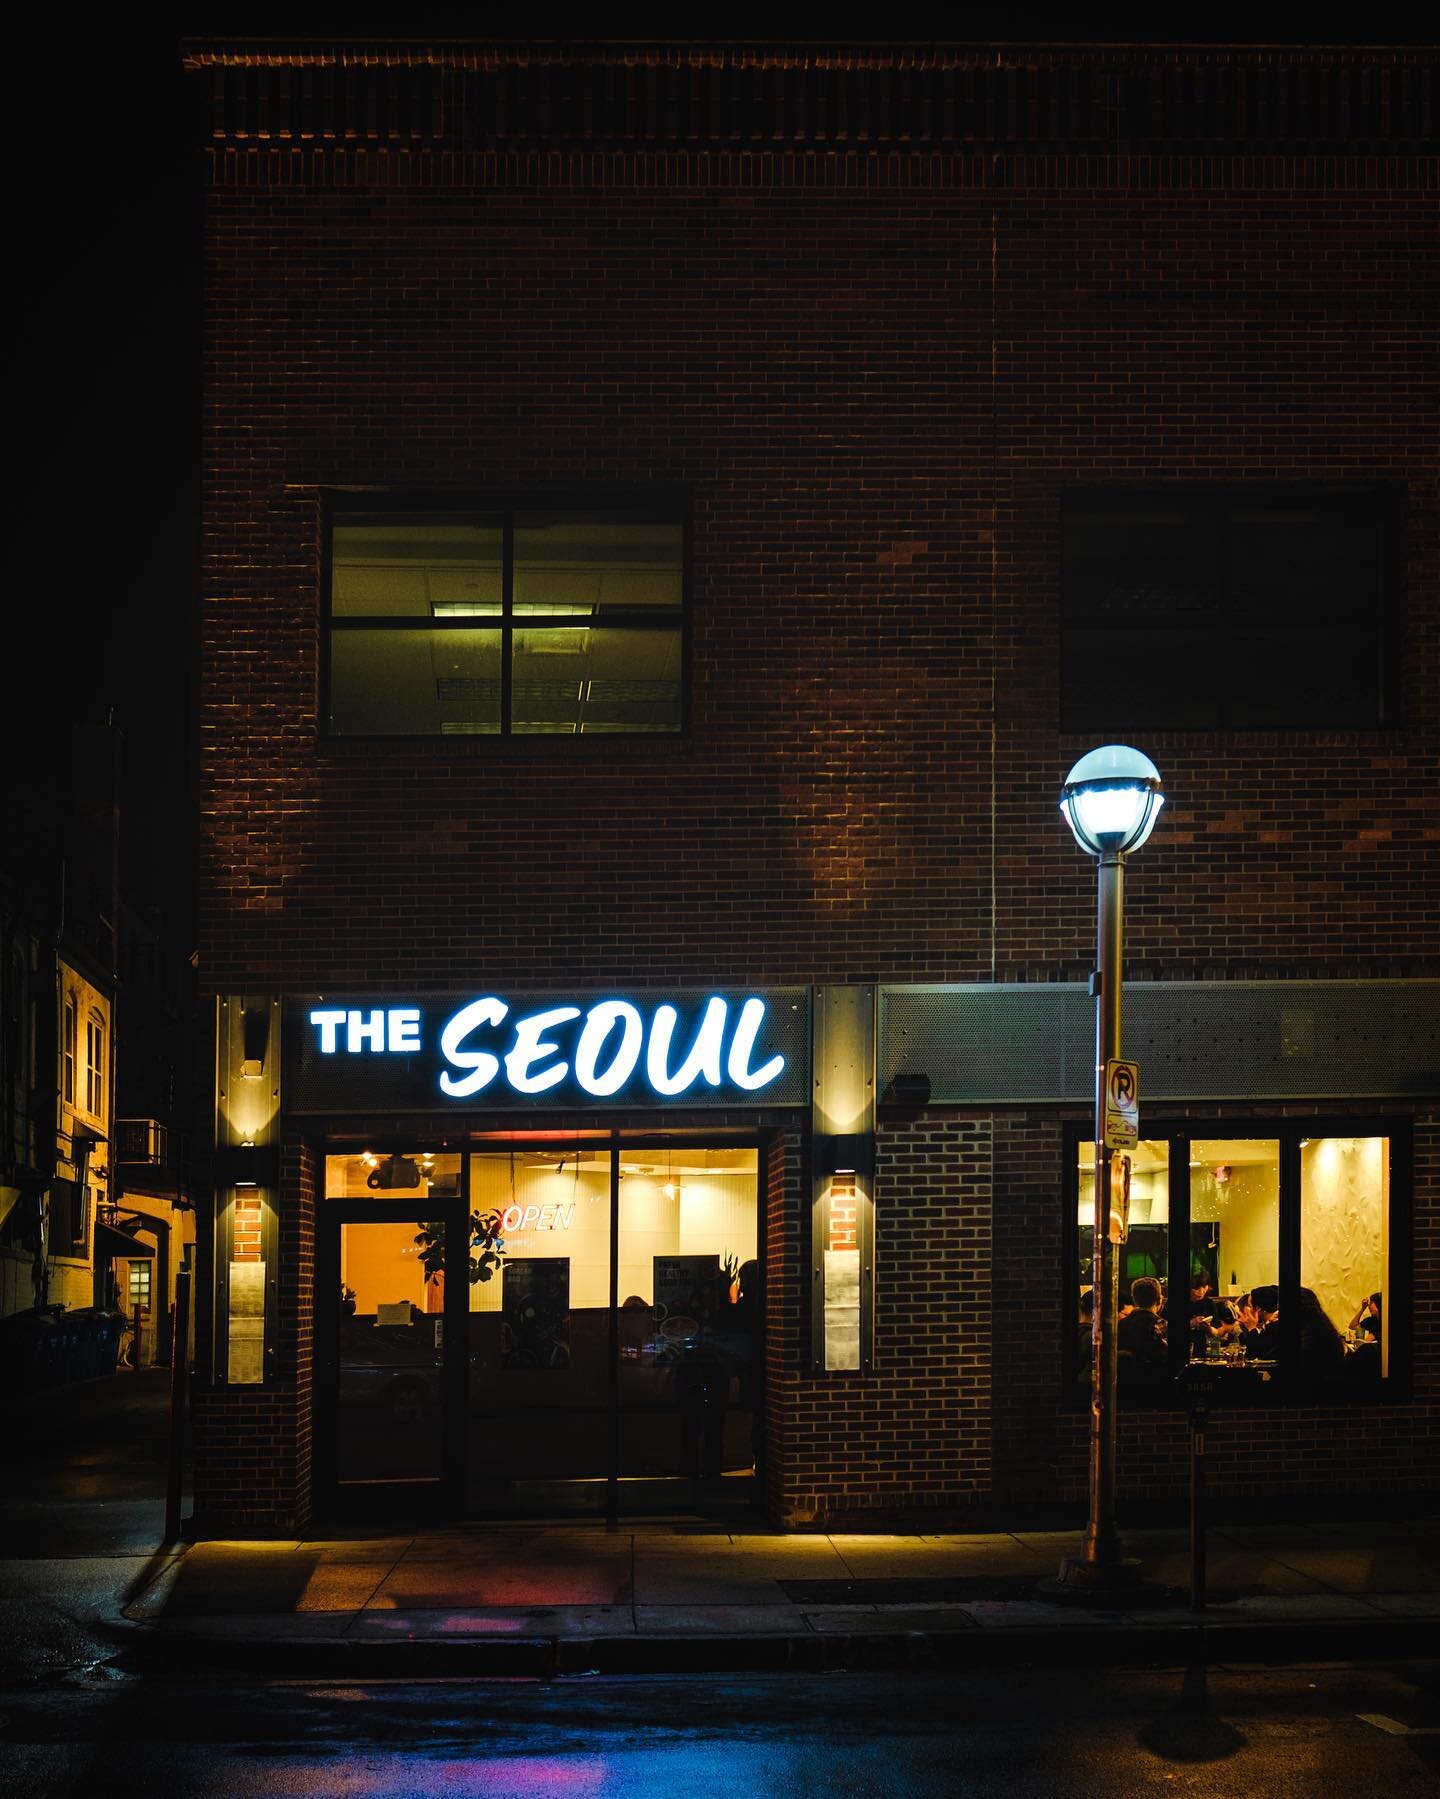 &quot;Seoul Food&quot;

The Seoul on the UWM campus Ann Arbor, MI in low light and after a good down pour.

📸 Fujifilm XT-4, XF16mmF1.4 R WR

@raw_potd raw_world @raw_edit @raw_depthoffield @raw_community  #raw_architecture #raw_street #verofamily #